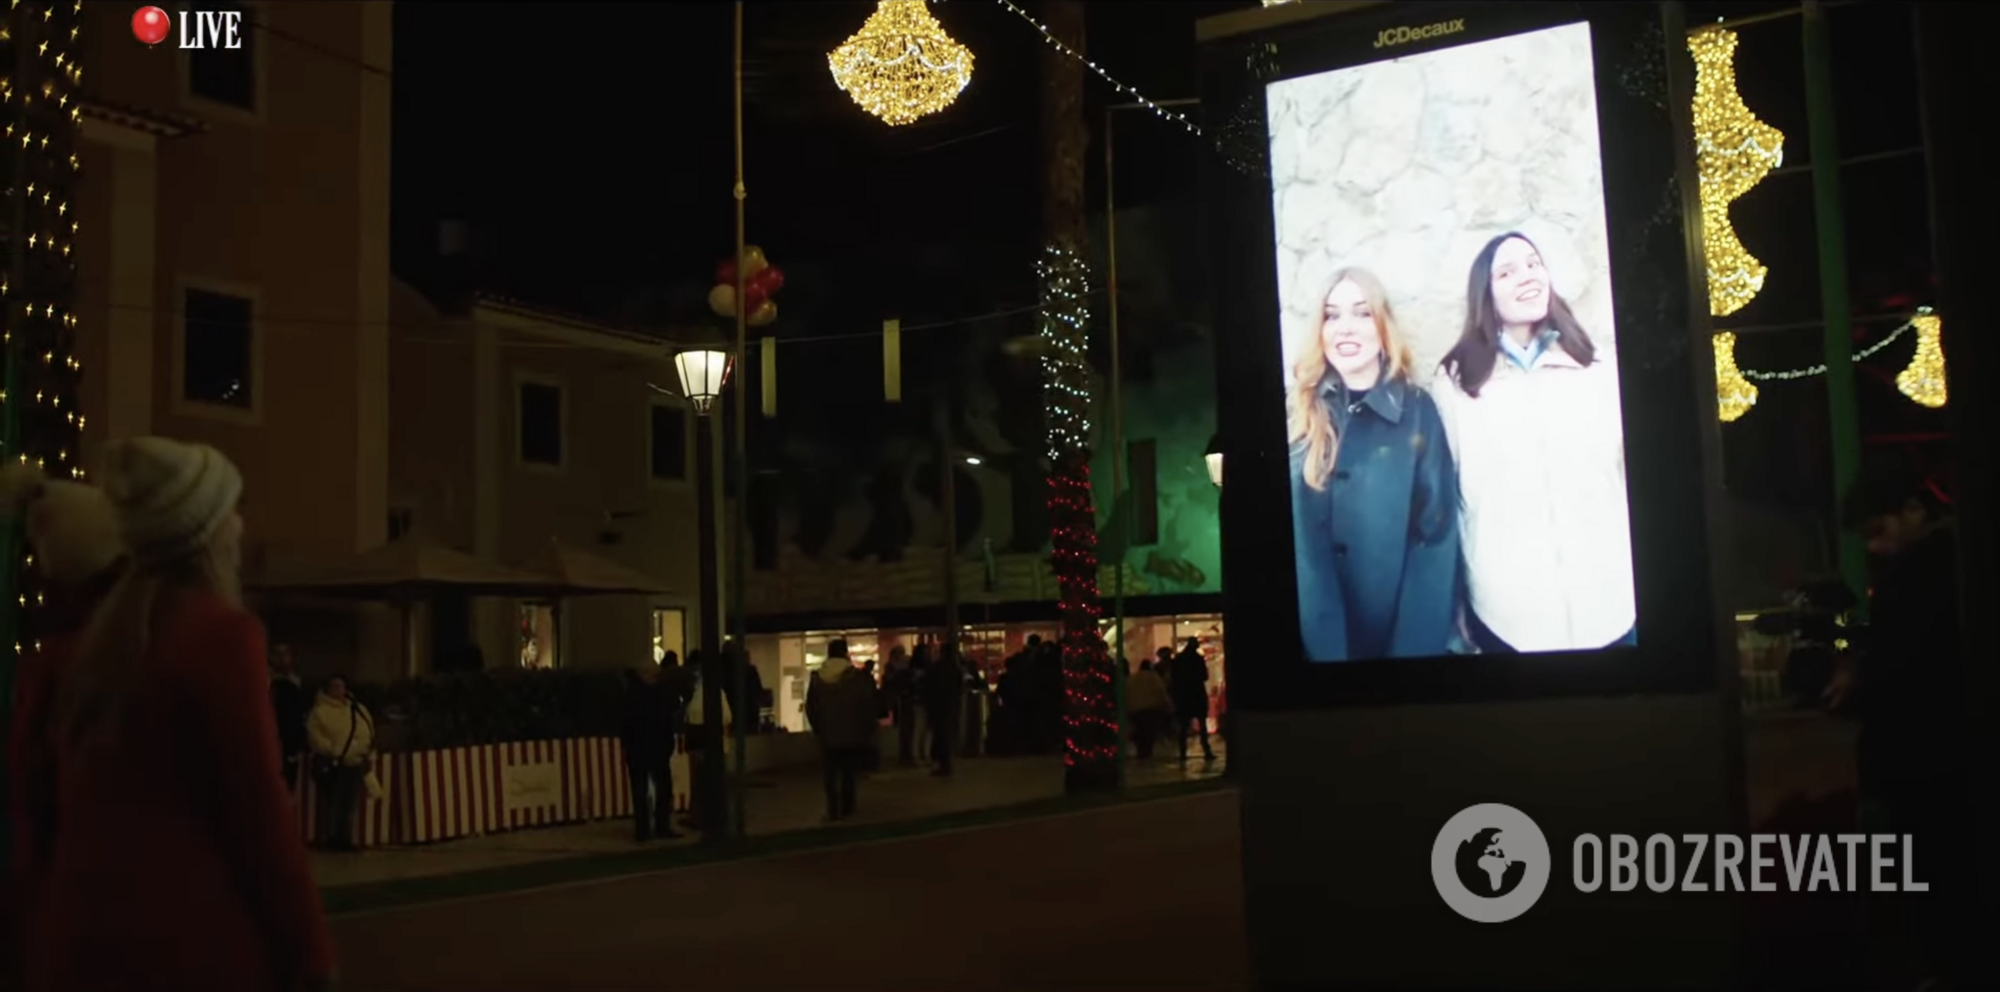 Coca-Cola proved its support for Russia in a new Christmas commercial. It ignored the war in Ukraine